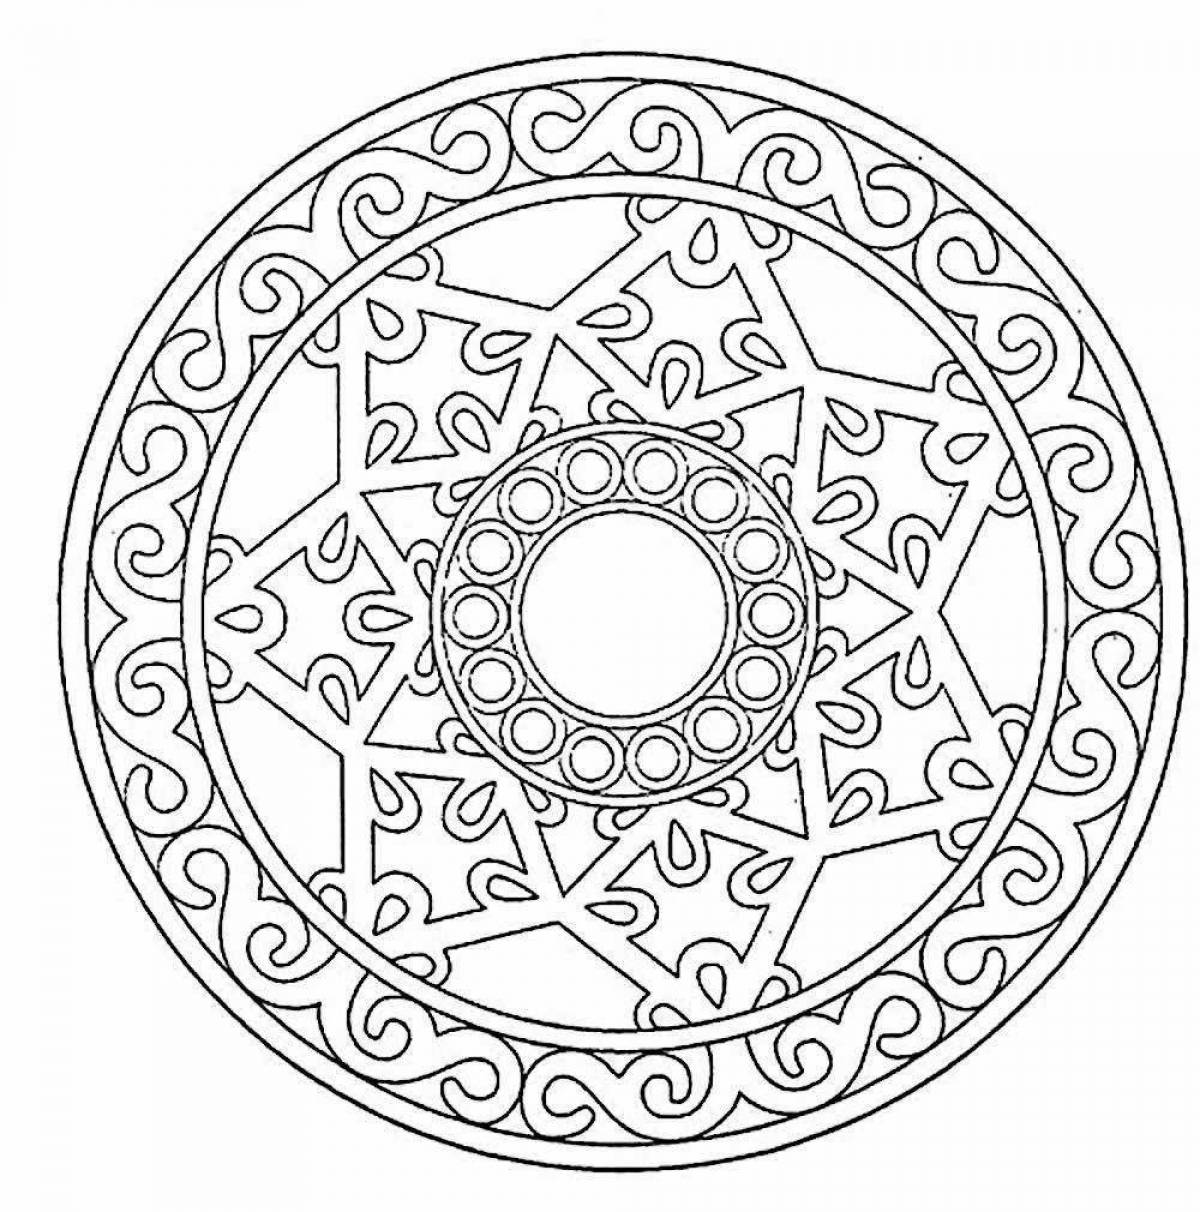 Festive round coloring page